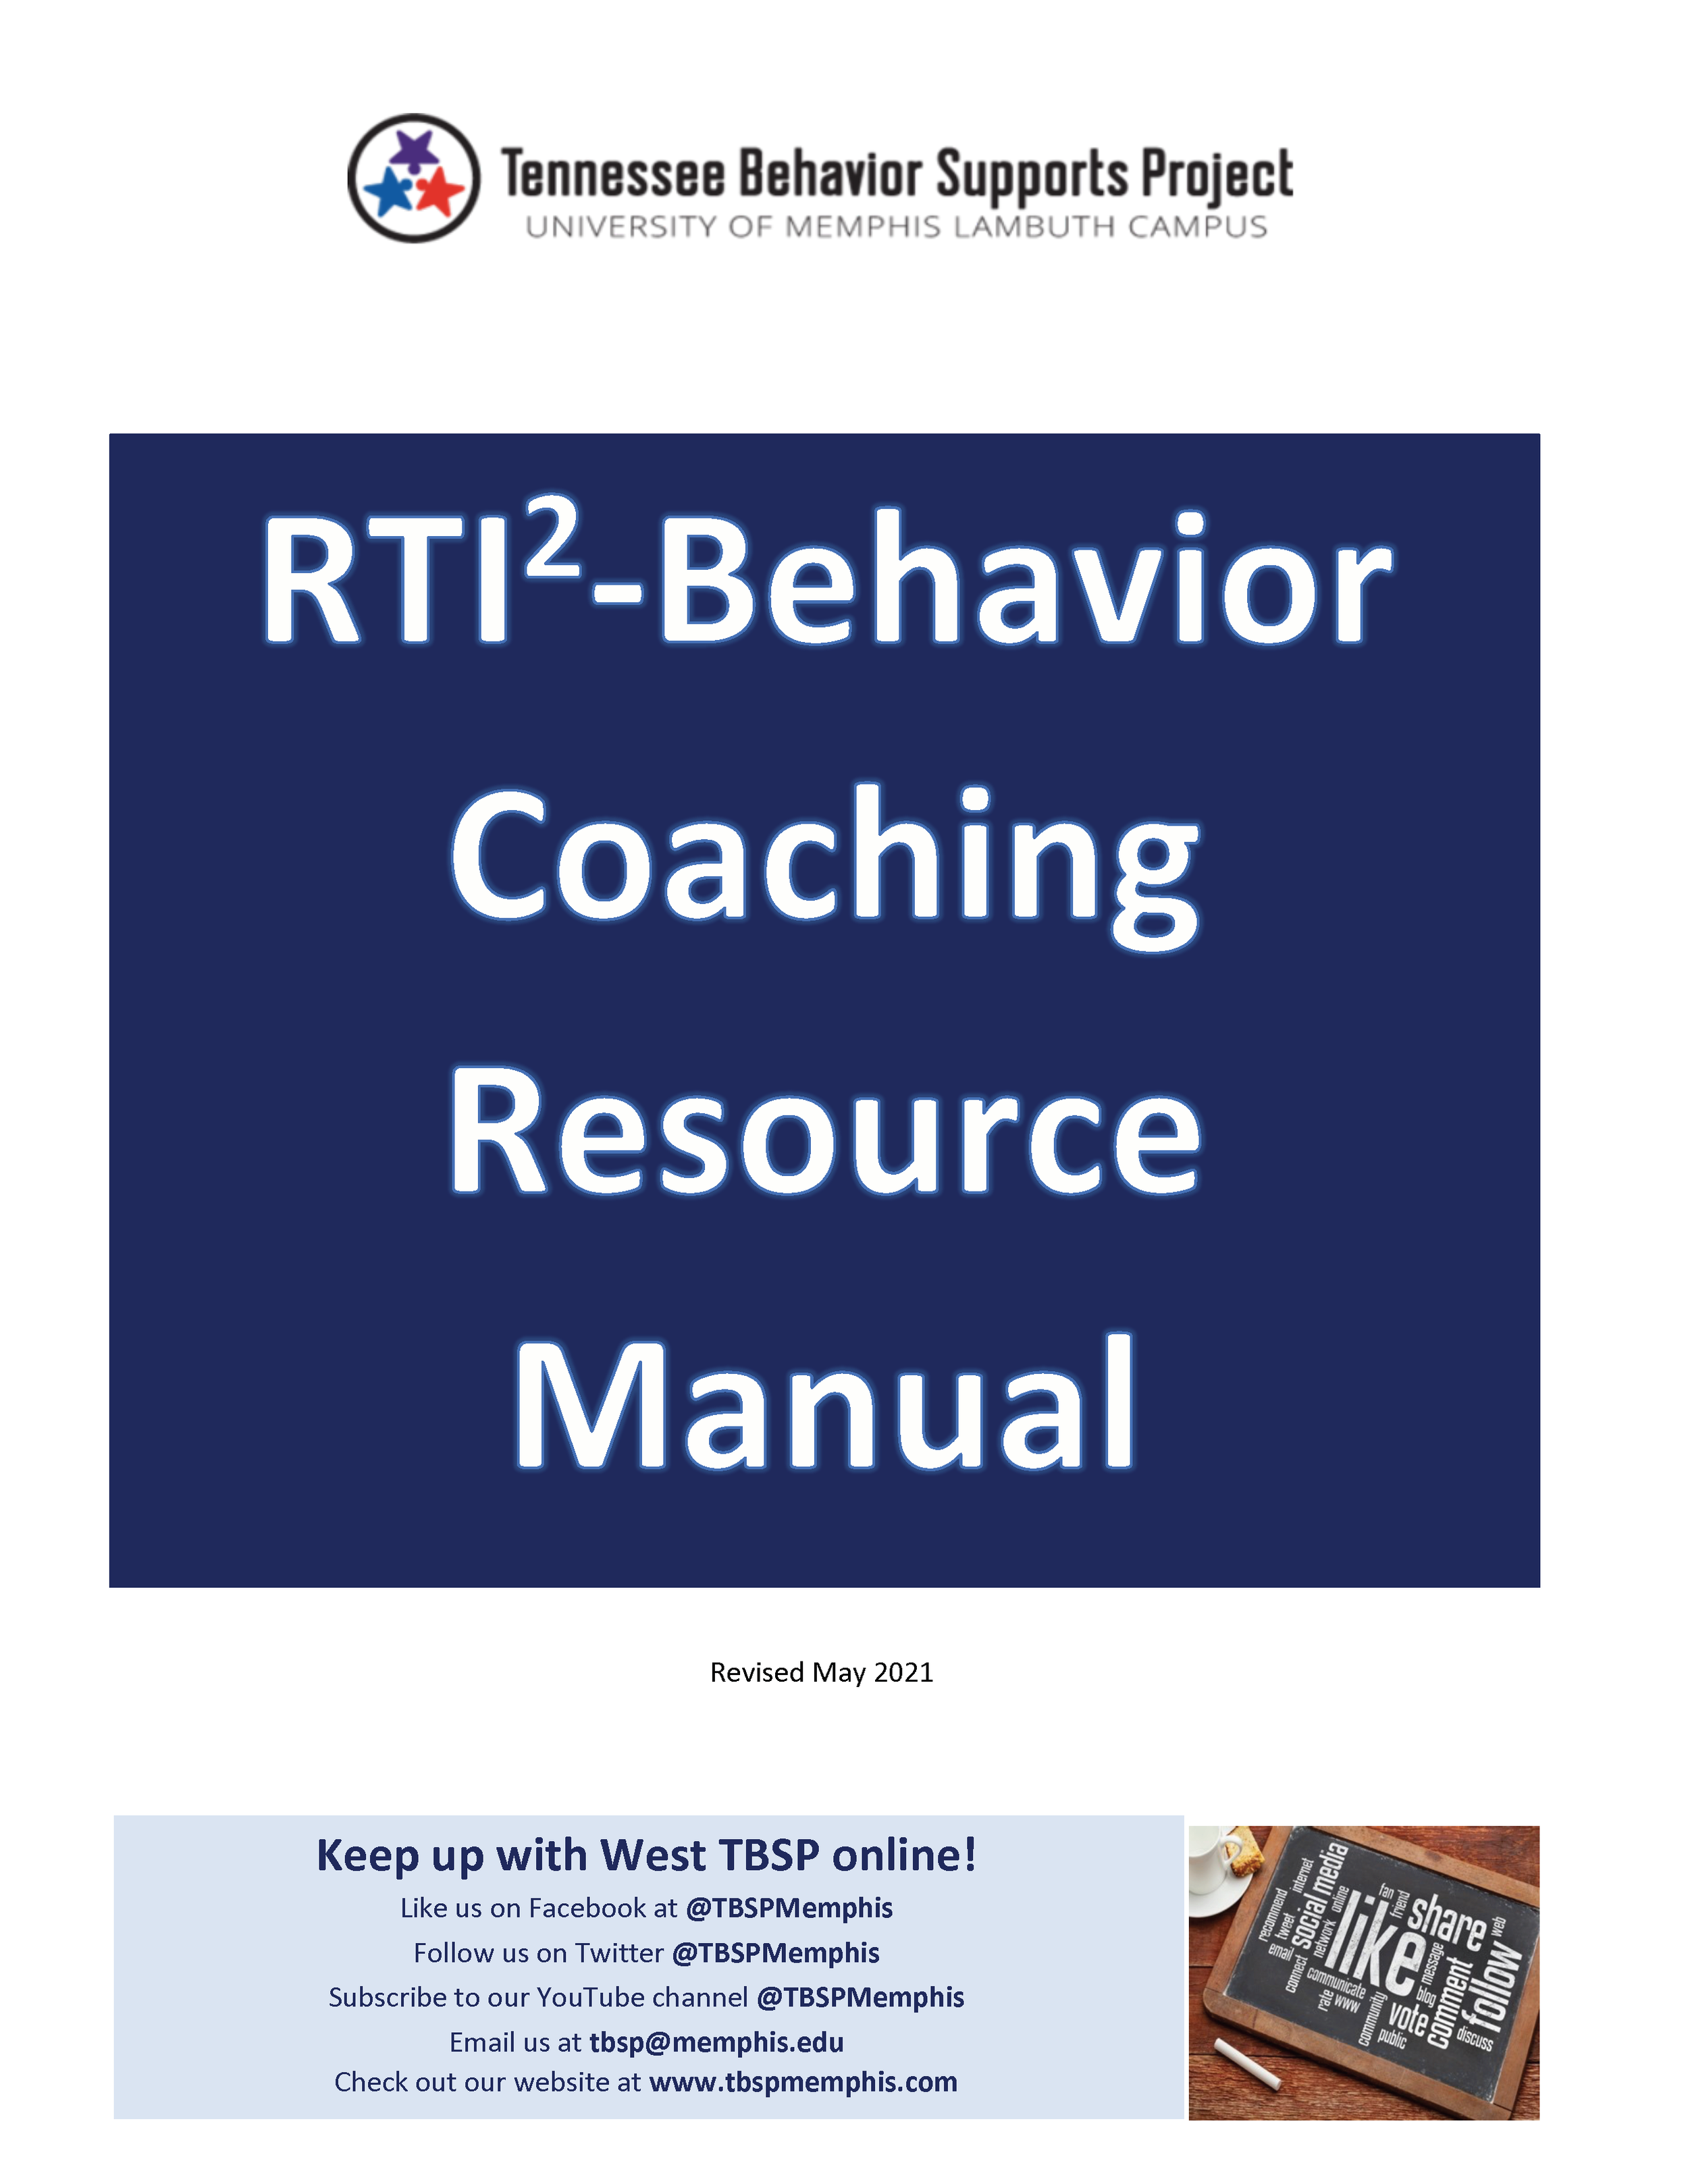 An image of the Coaching Resource Manual. Click to download.